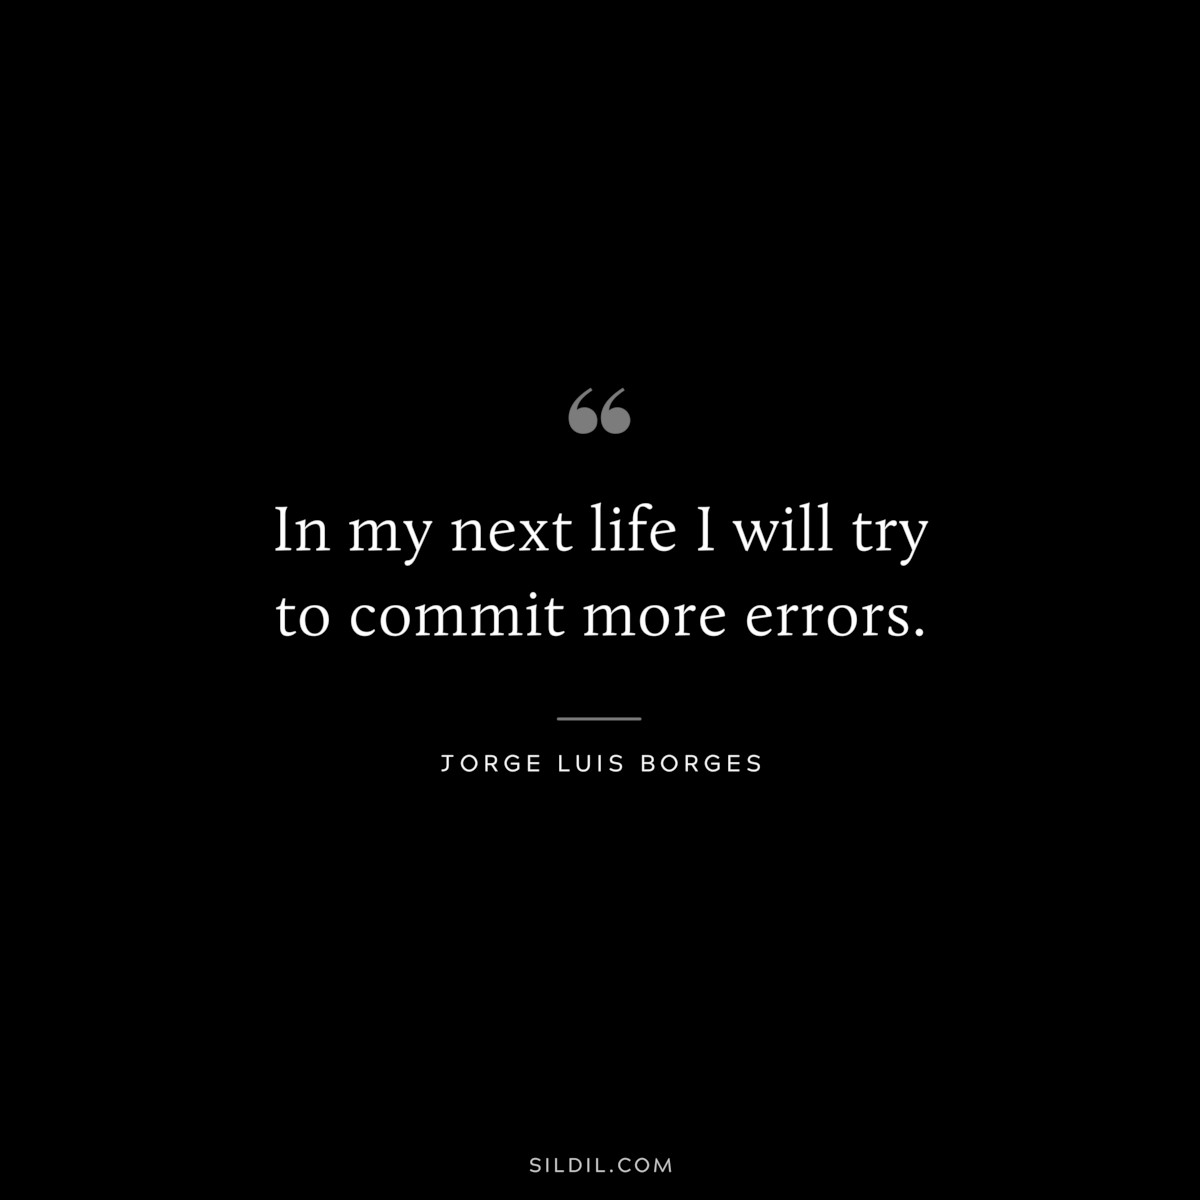 In my next life I will try to commit more errors. ― Jorge Luis Borges